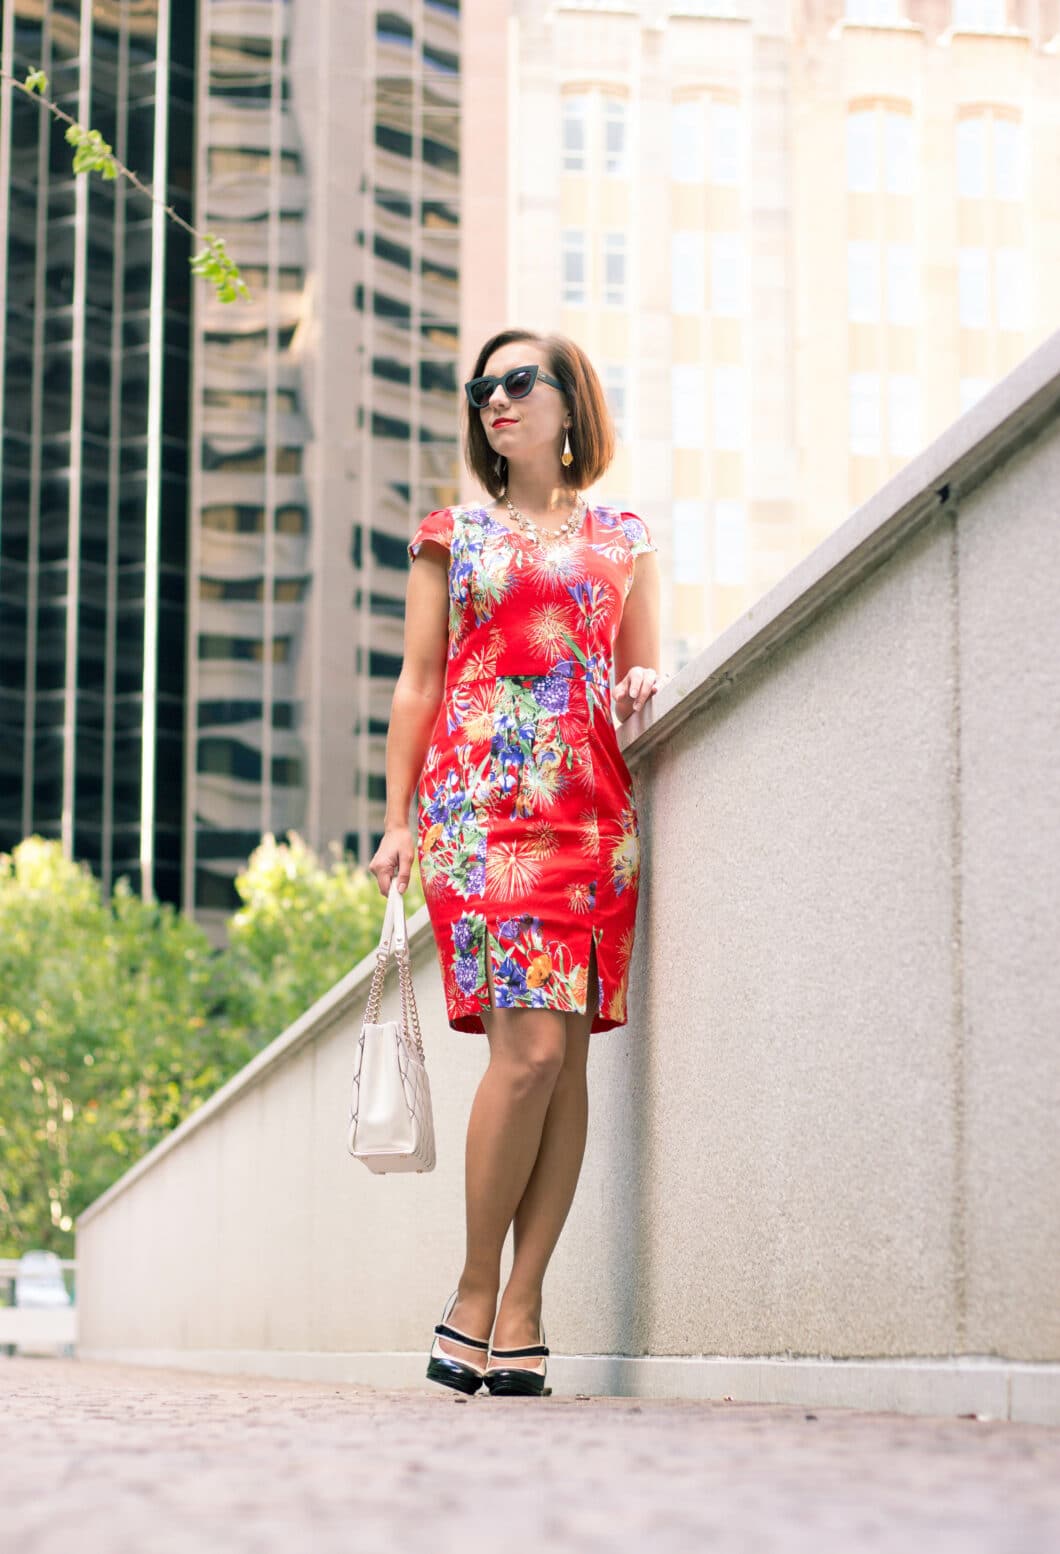 Styling a Red Floral Dress for Spring